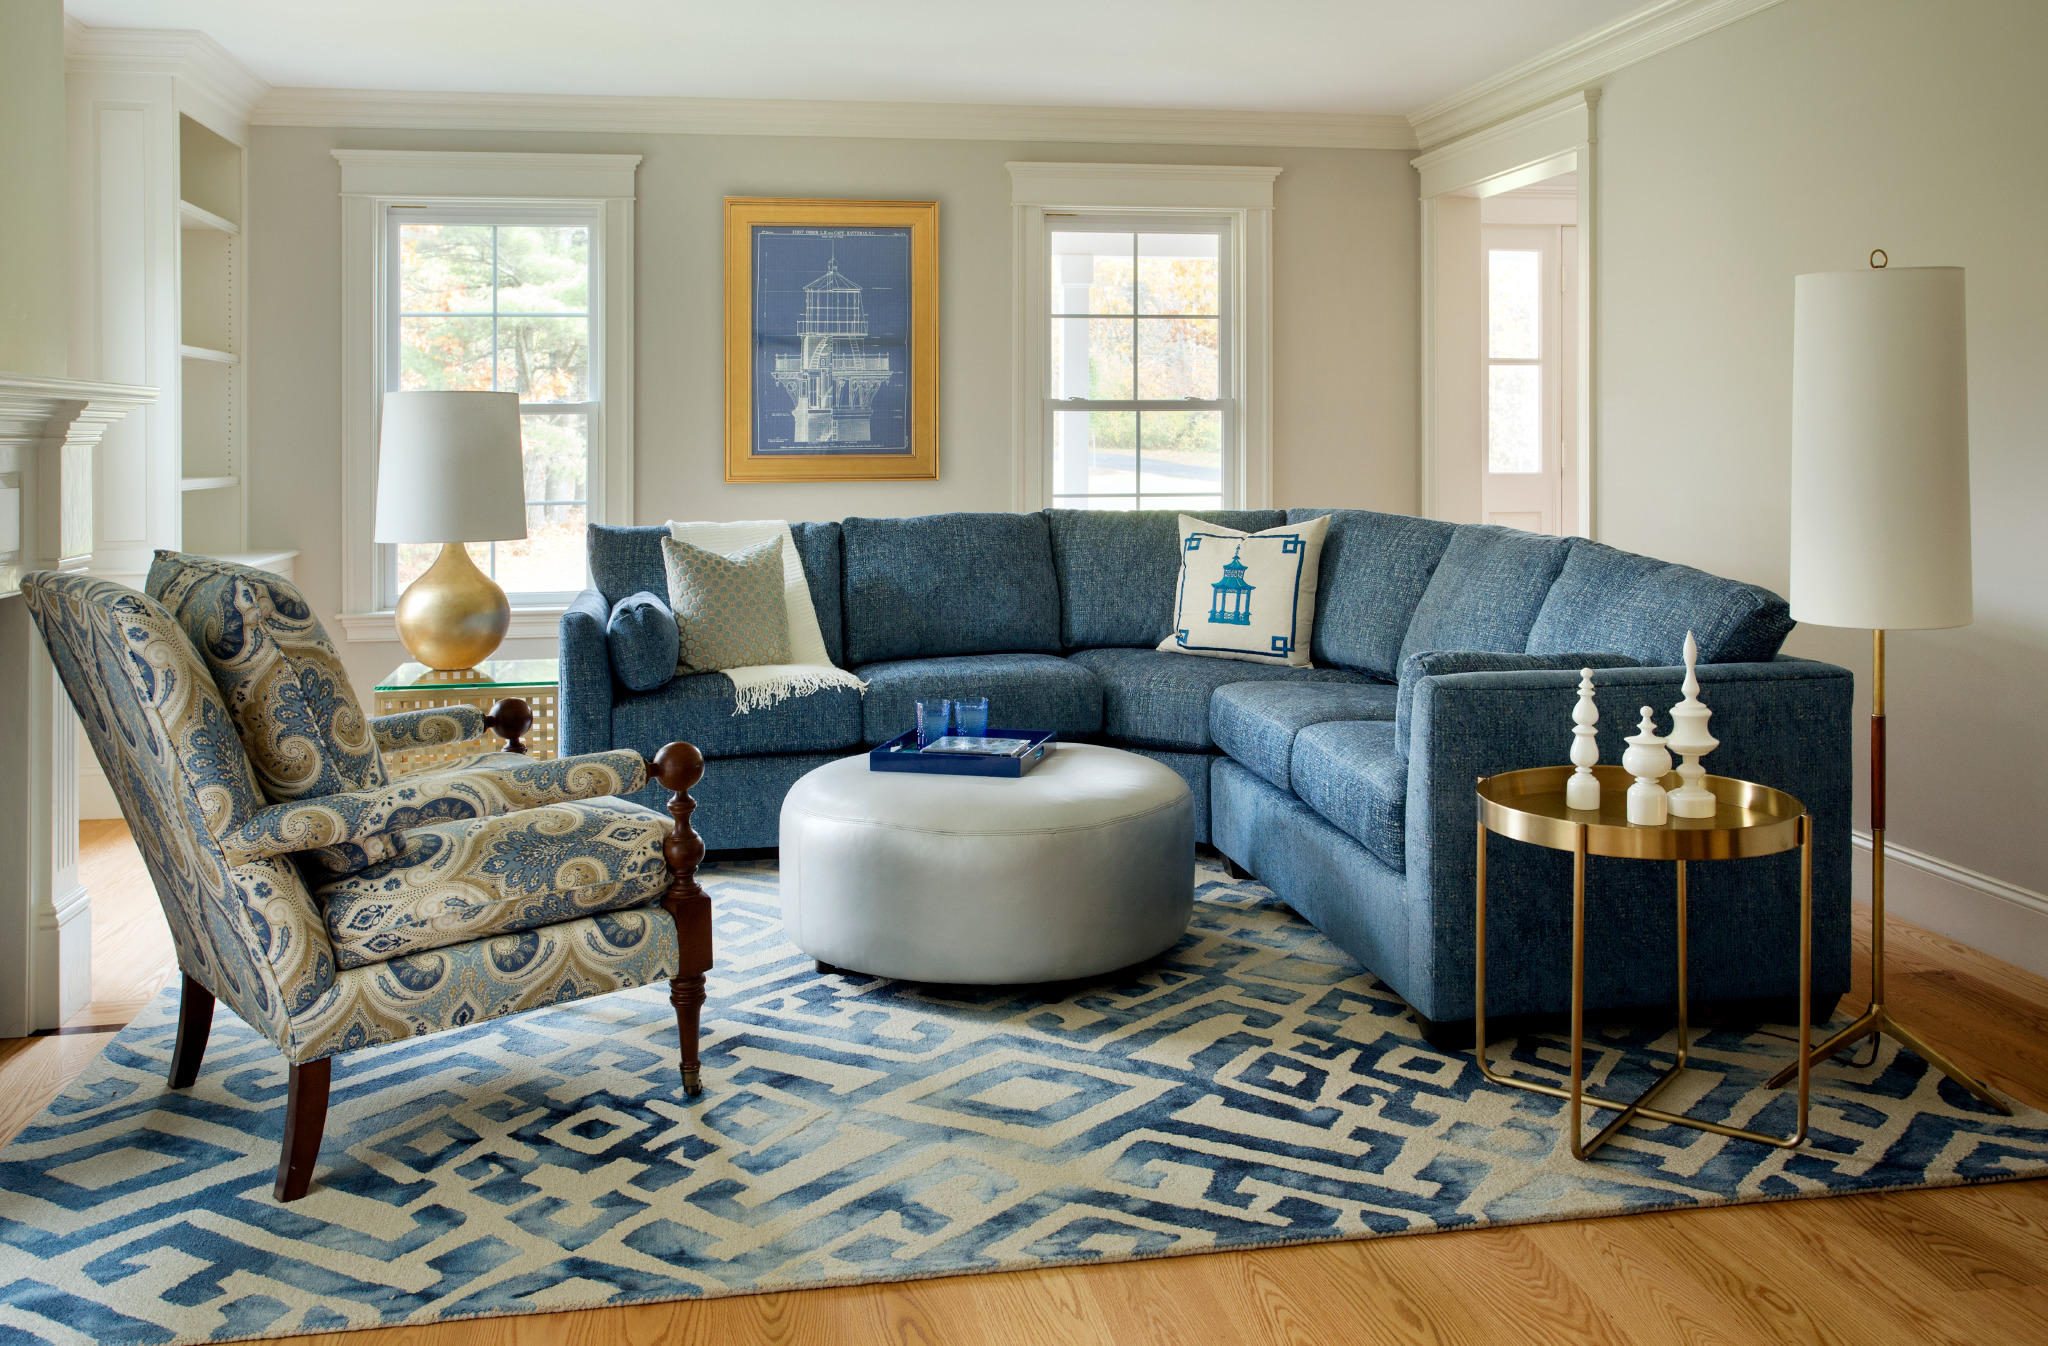 How to Clean a Fabric Couch: The Best Way to Keep It Naturally Clean